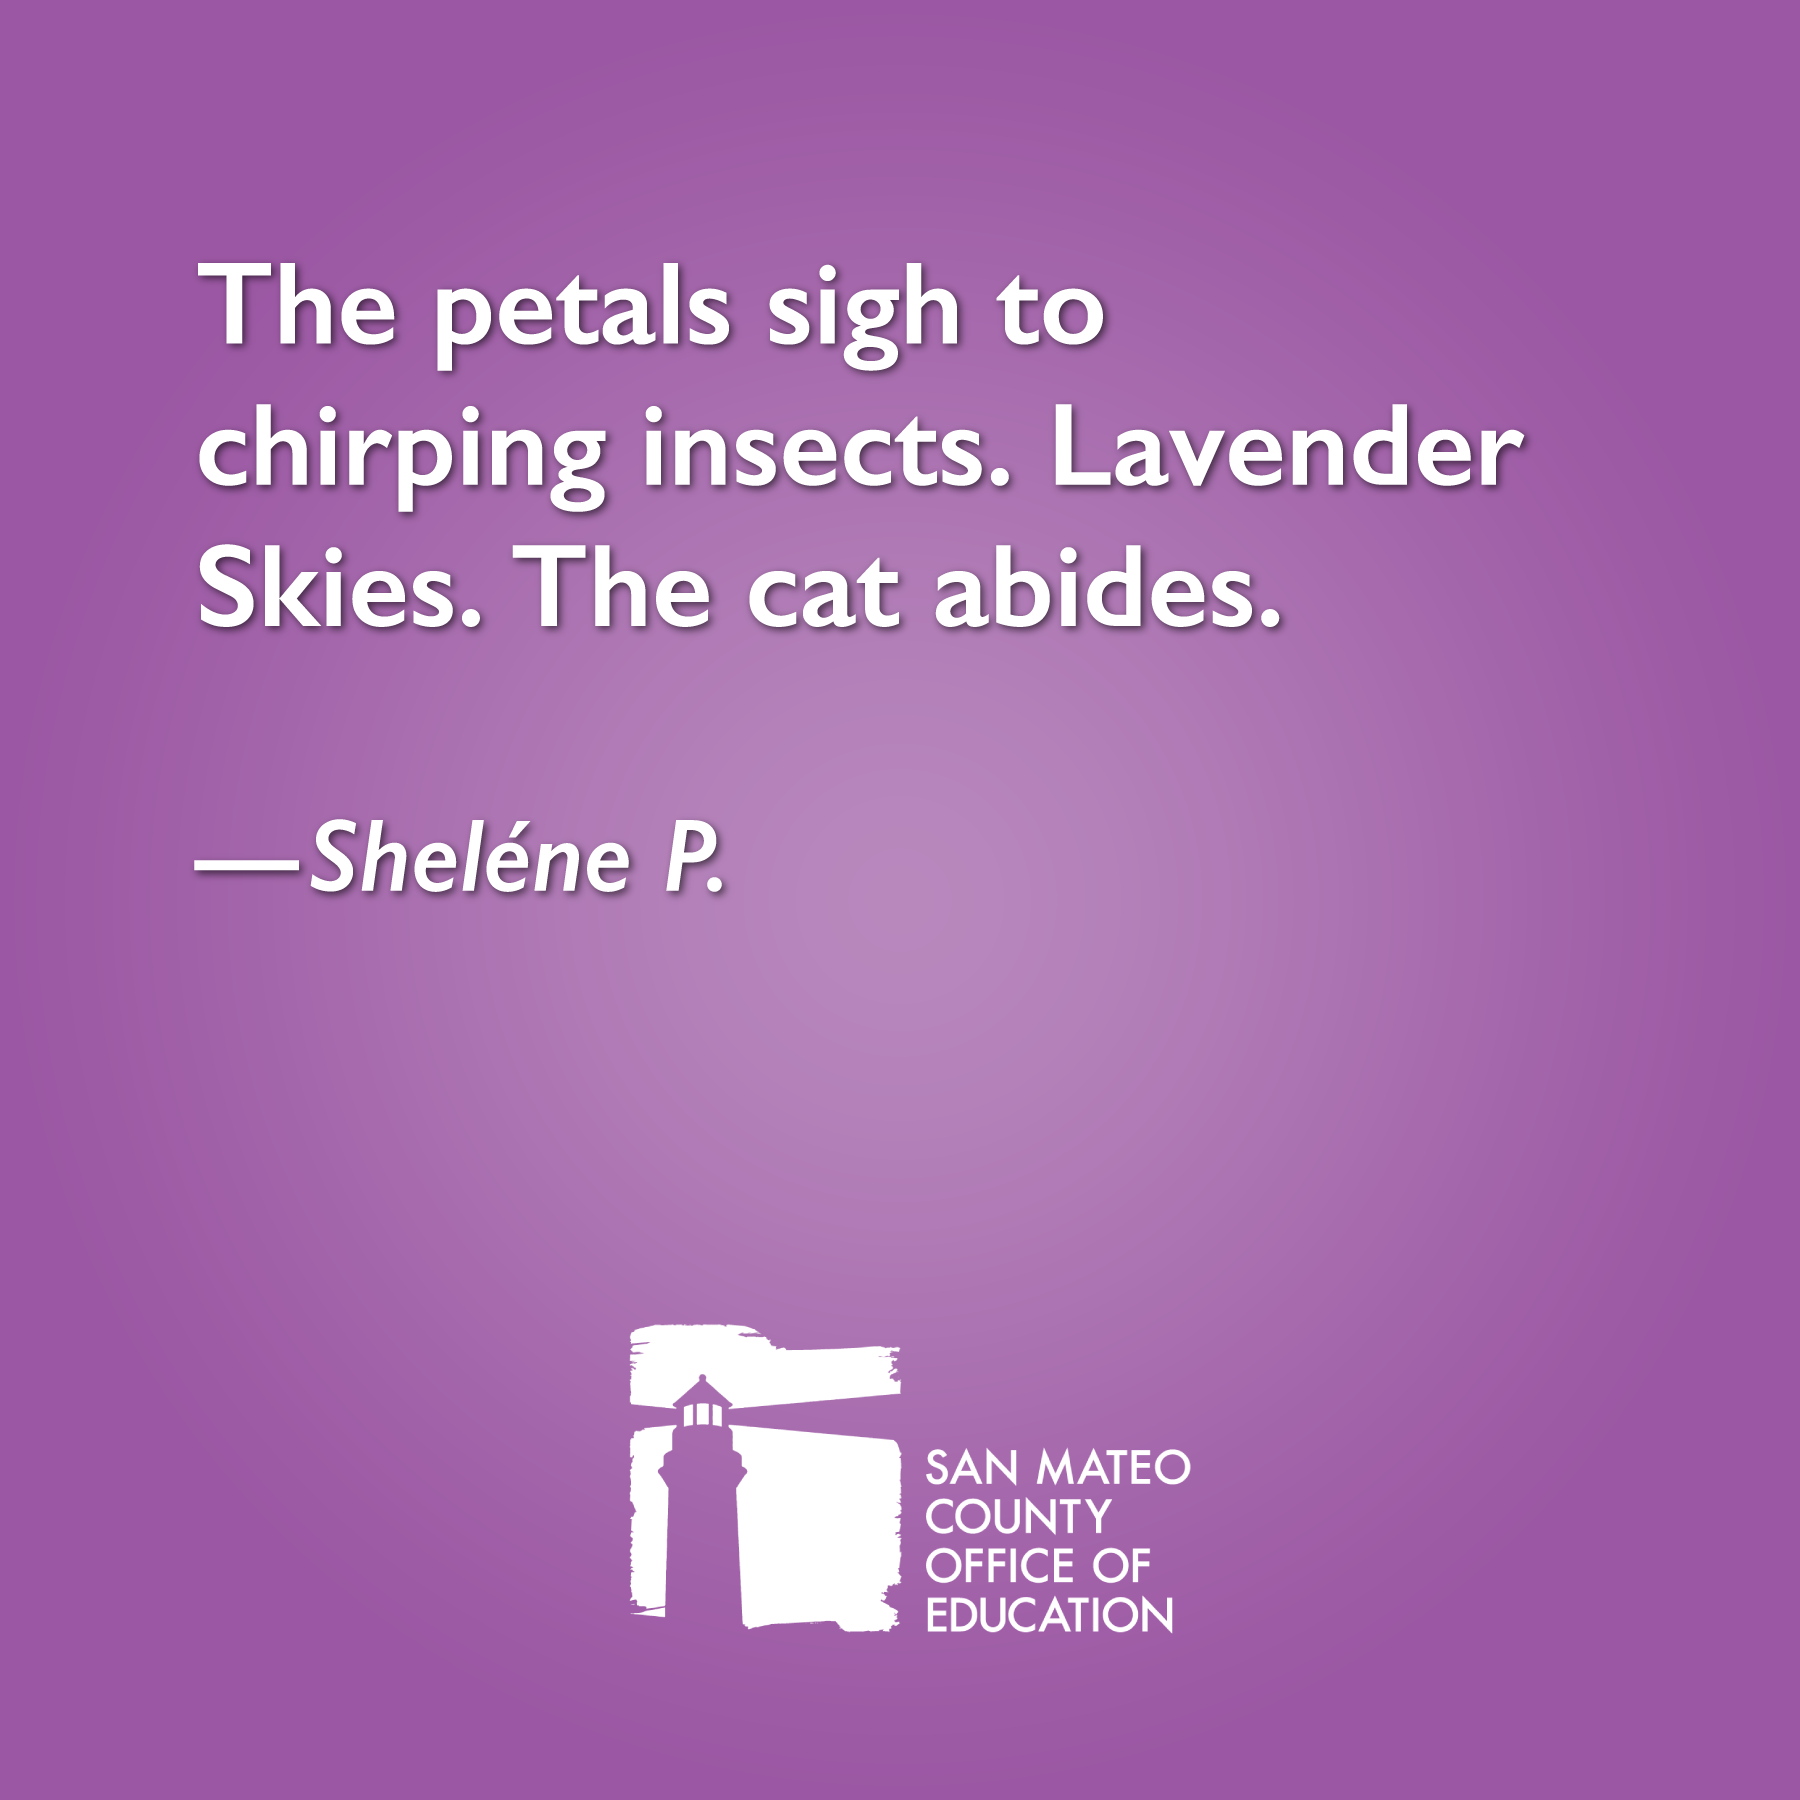 The petals sigh to chirping insects. Lavender Skies. The cat abides. Written by Sheléne P.